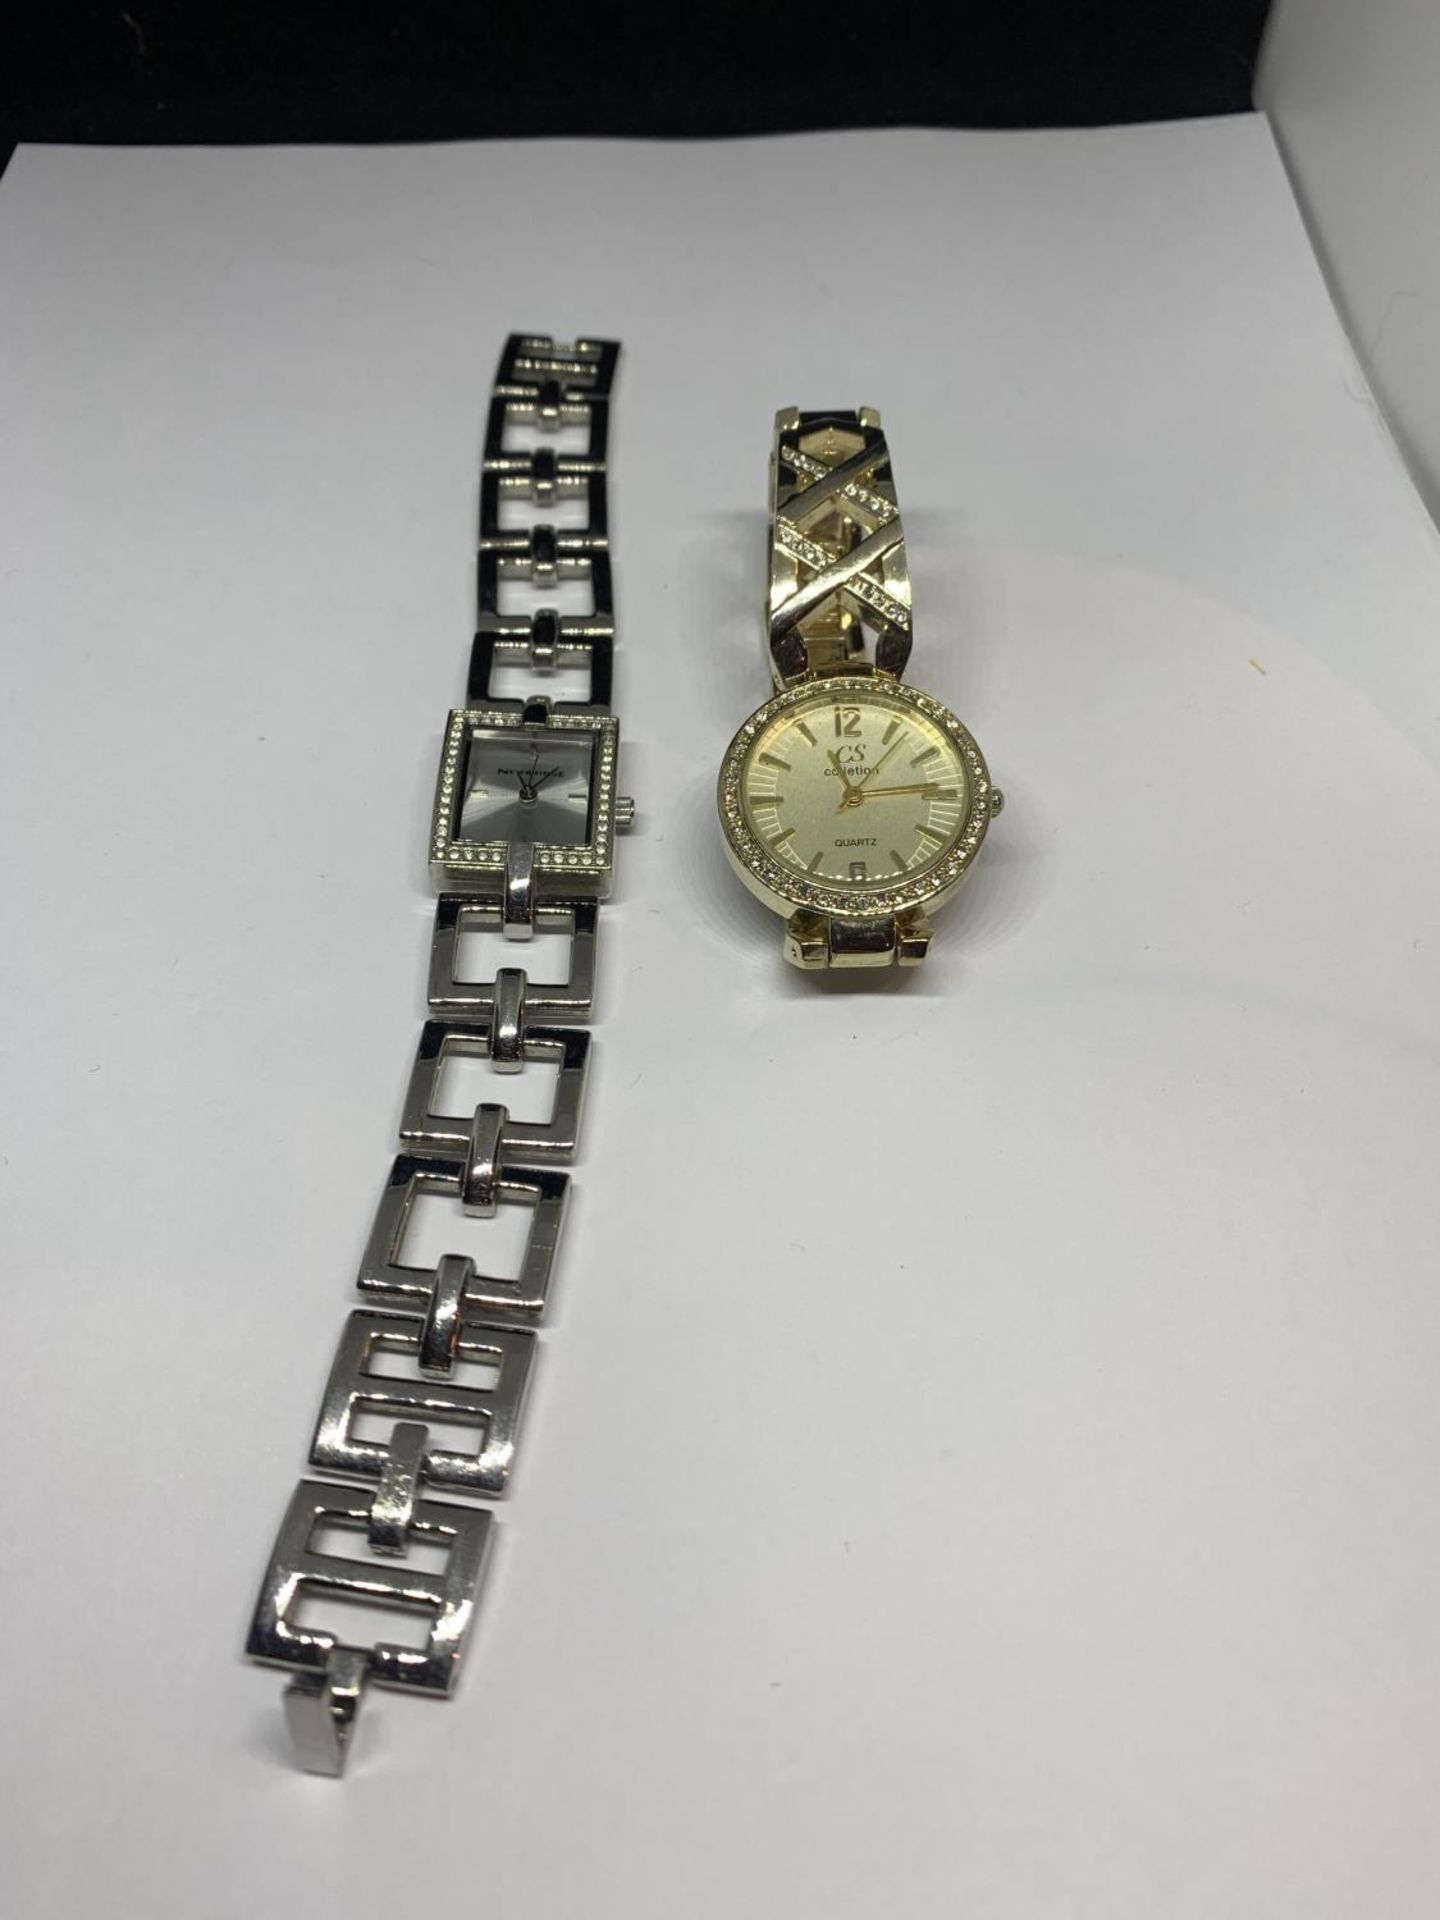 TWO DECORATIVE WRIST WATCHES WITH CLEAR STONE DECORATION ONE WITH A RECTANGULAR FACE AND A